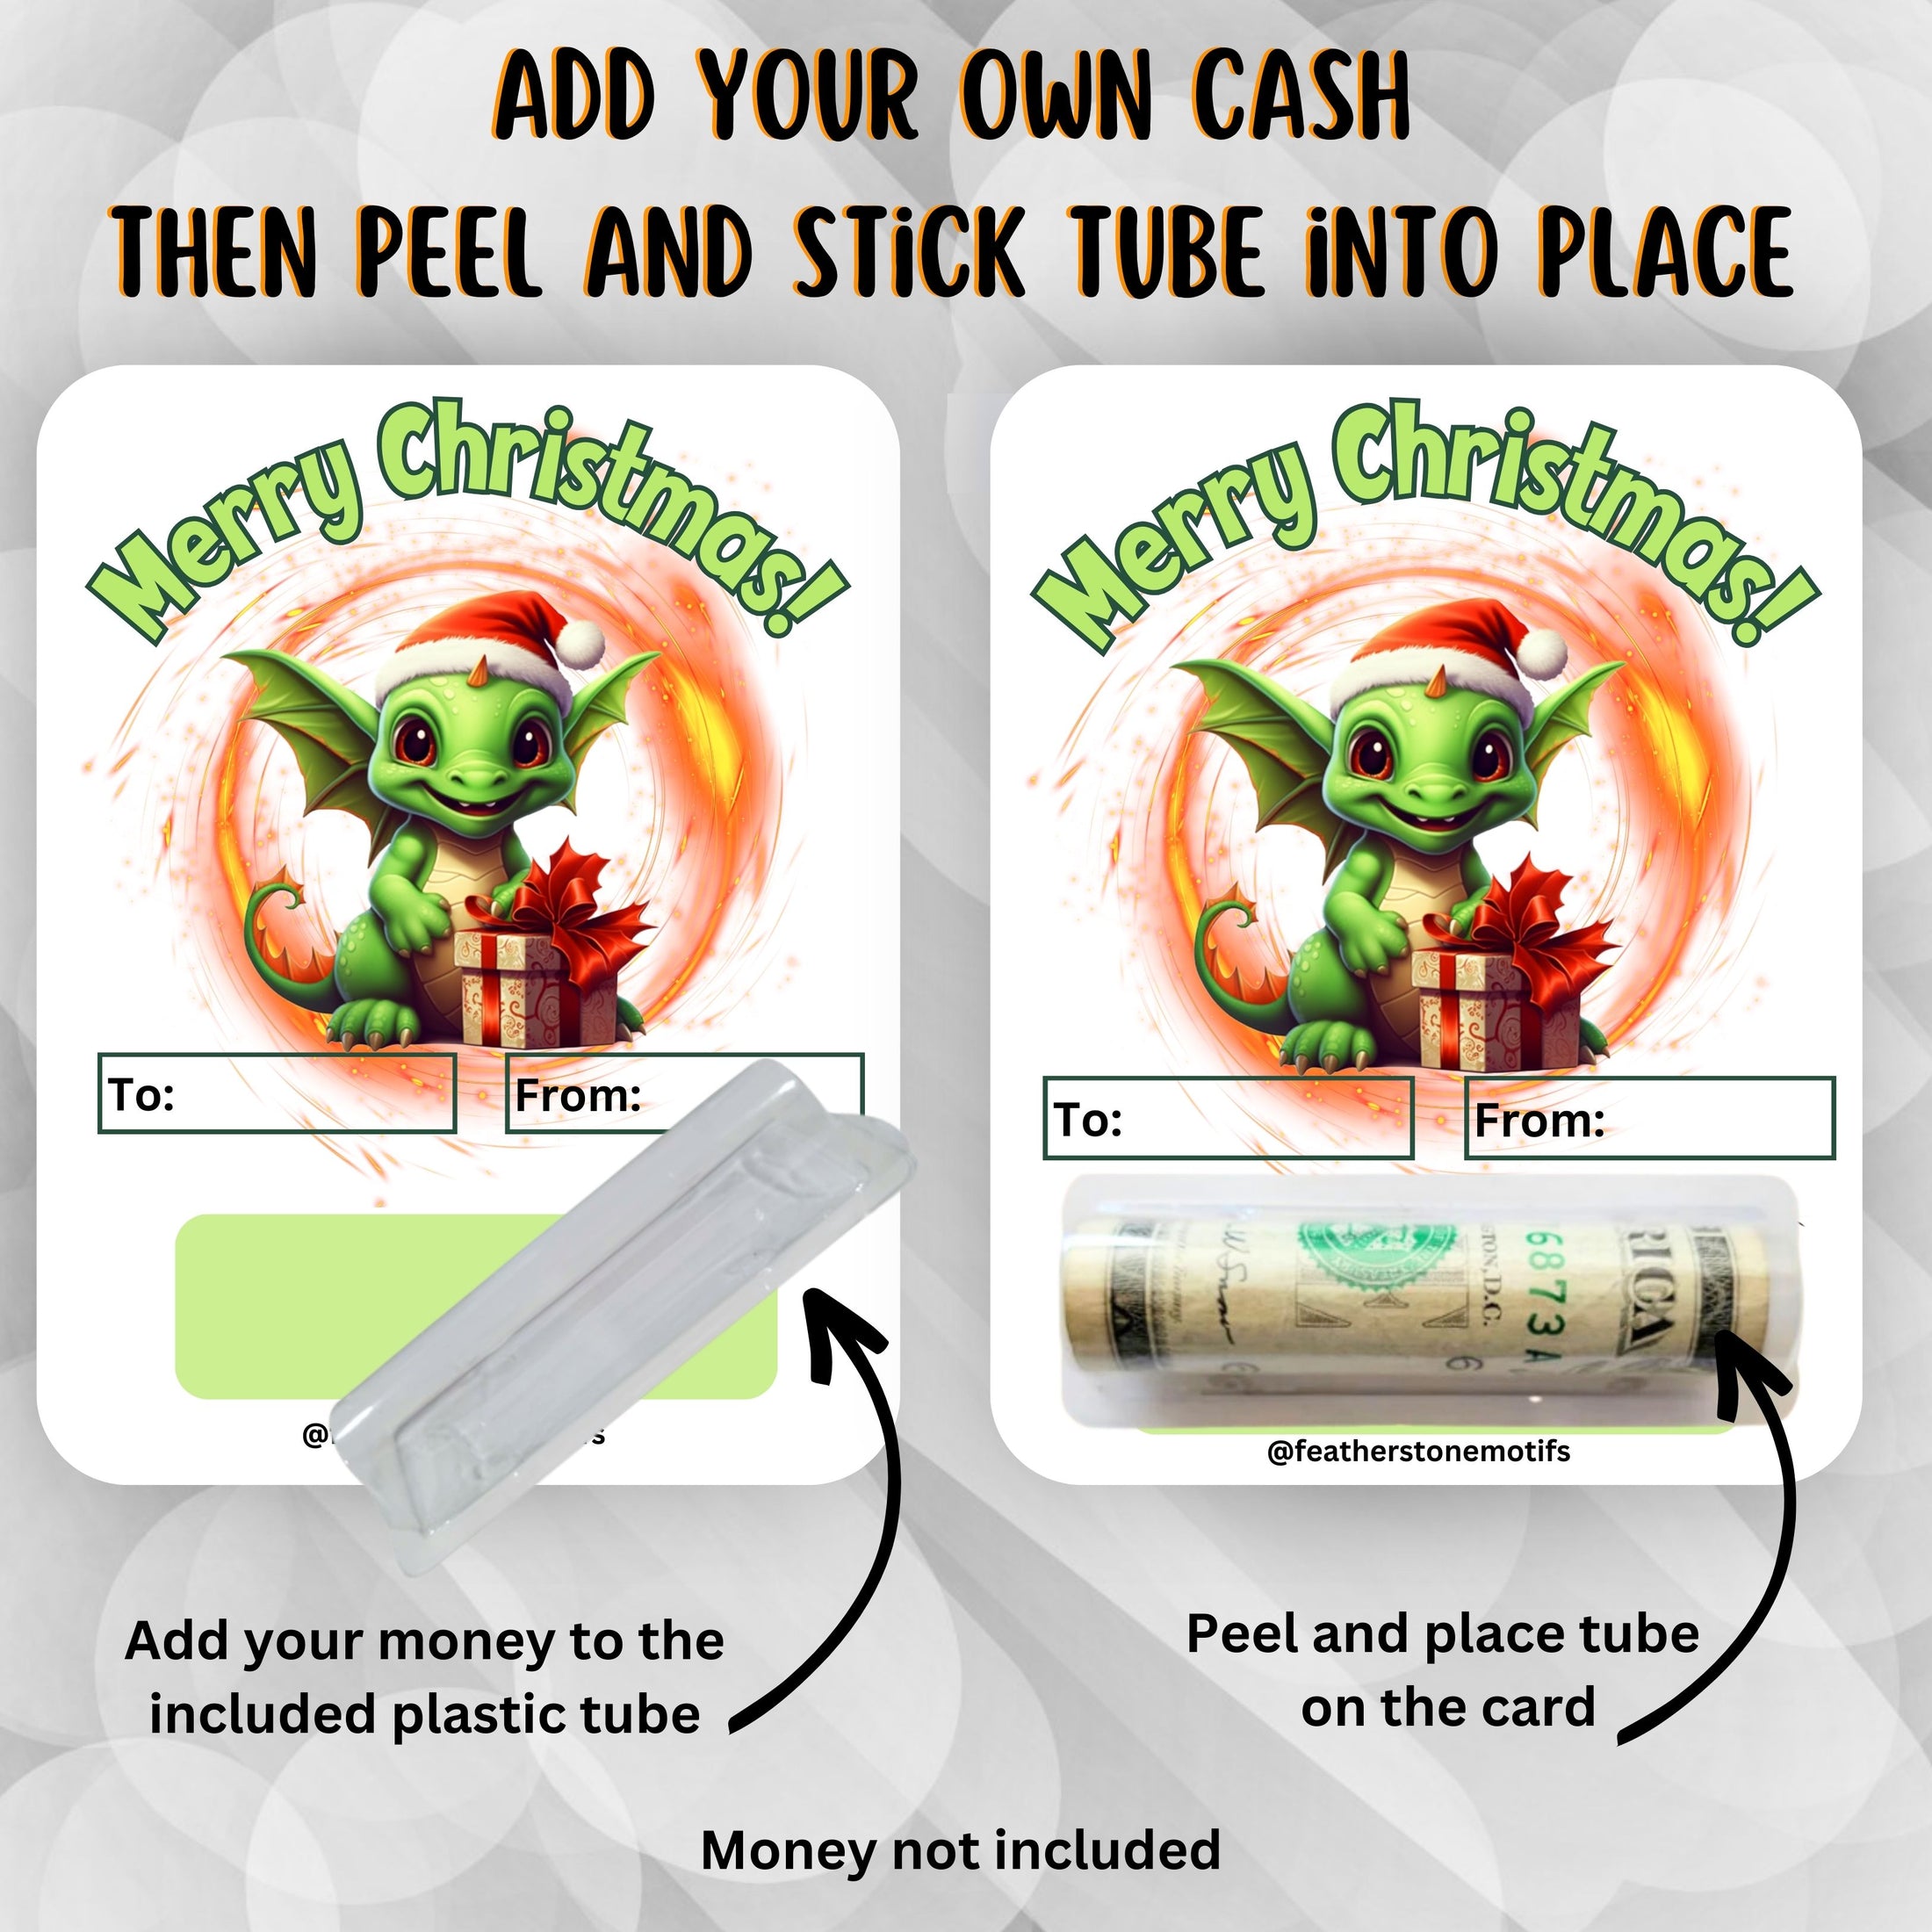 This image shows how to attach the money tube to the Dragon money card.